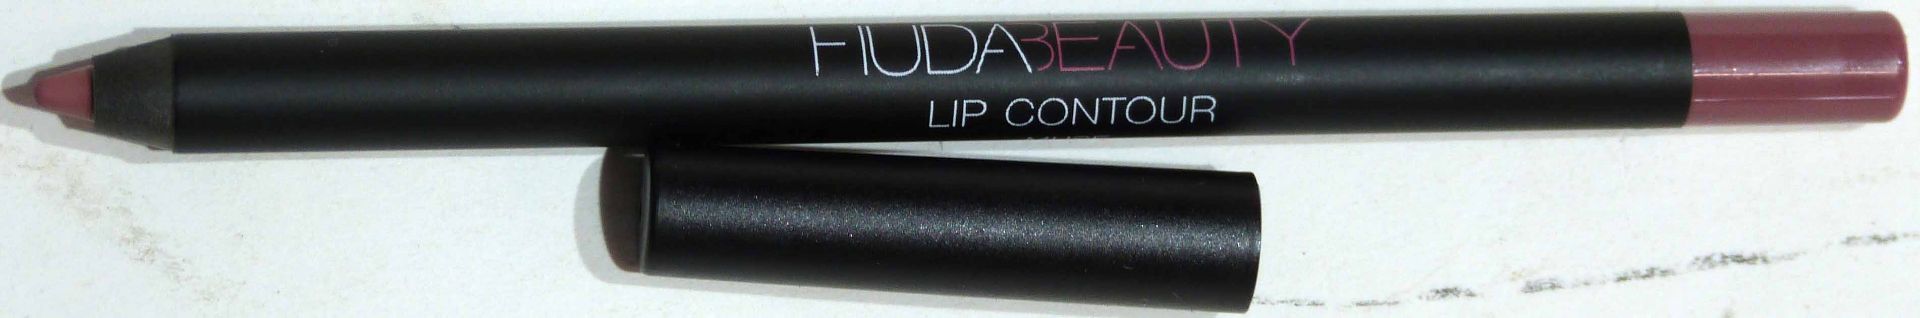 Huda Beauty Contour and Strobe Lip Set. (10 in lot) - Image 7 of 7